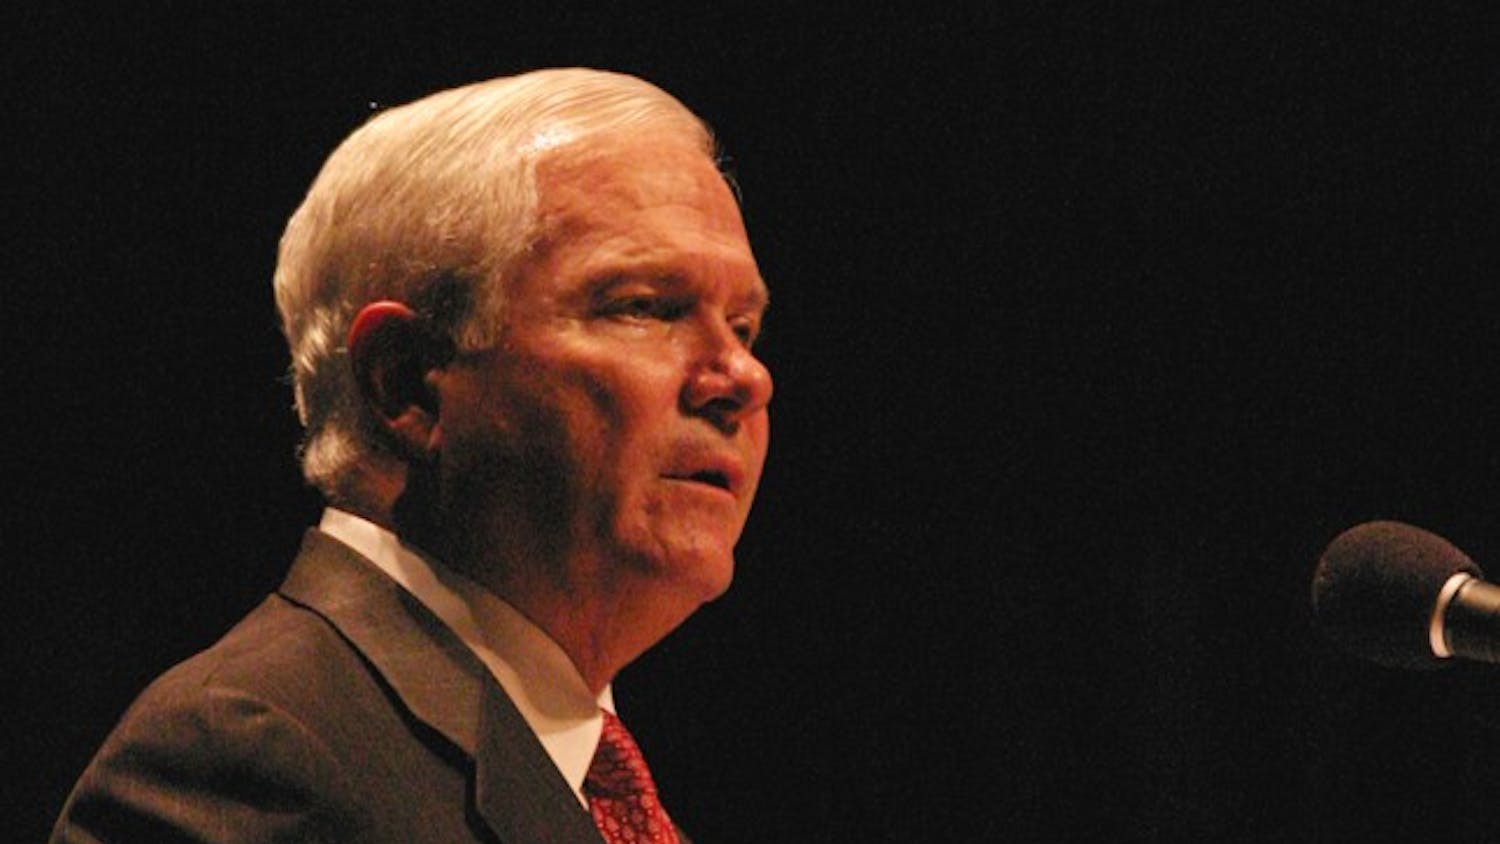 Secretary of Defense Robert Gates spoke at Duke University on Wednesday. “If America’s best and brightest young people will not step forward, who then can we count on to protect and sustain the greatness of the country?” he said. 